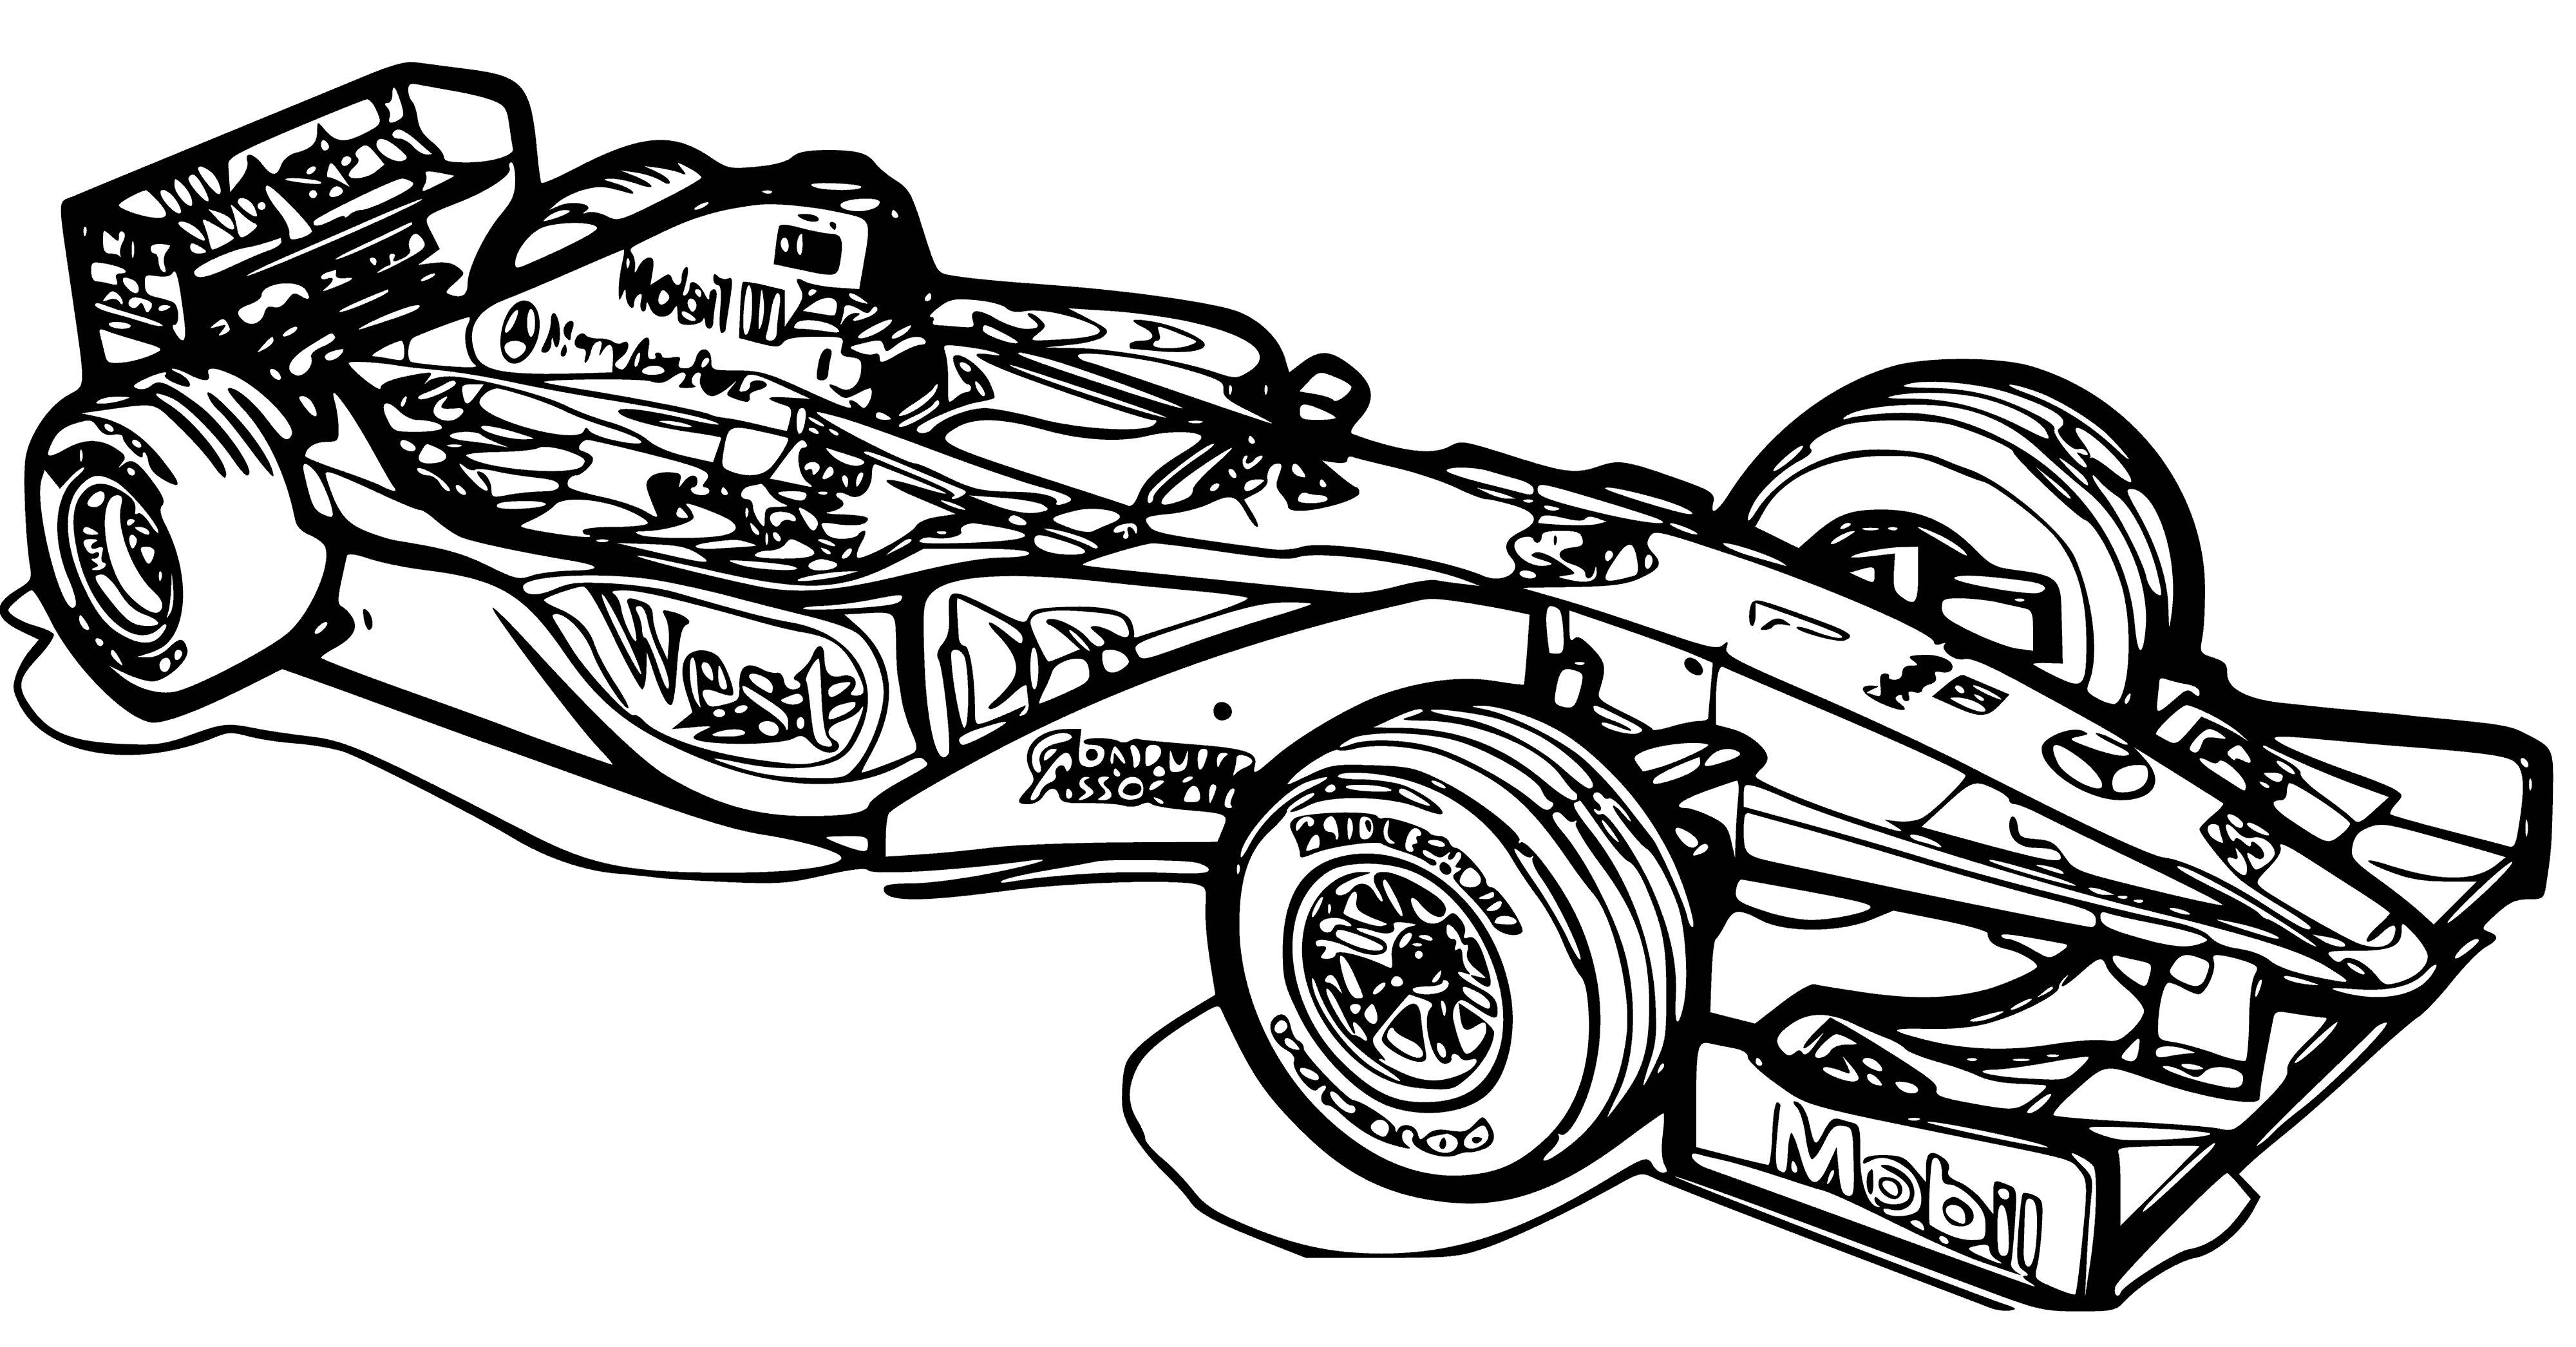 coloring page: 3 cars racing on dirt track; bg has trees, mountains.